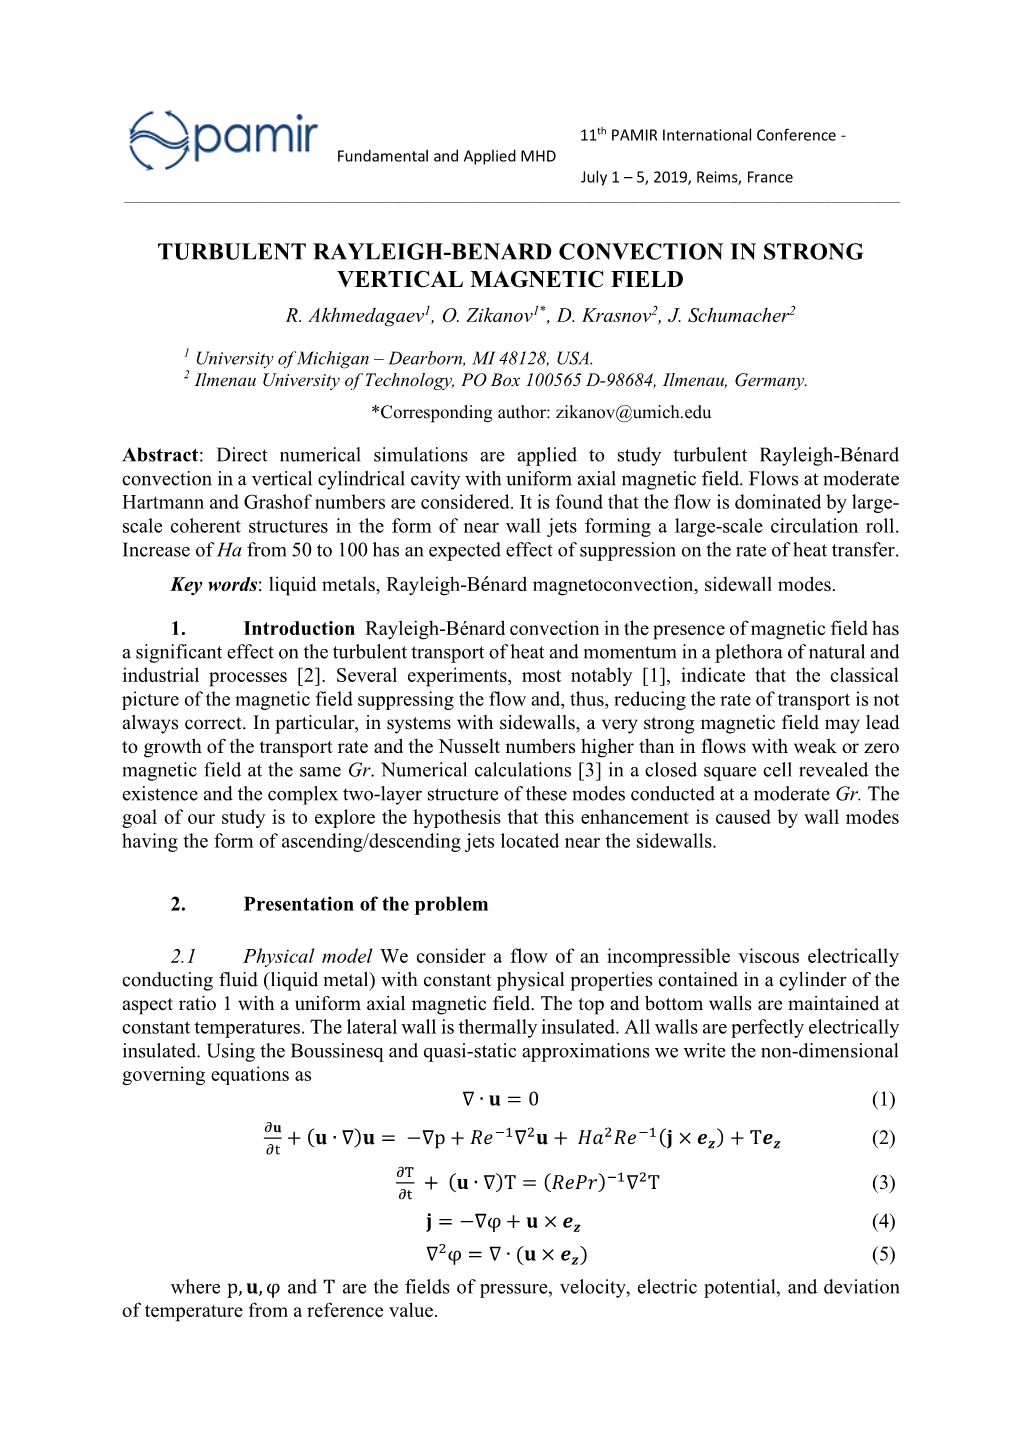 Turbulent Rayleigh-Benard Convection in Strong Vertical Magnetic Field R